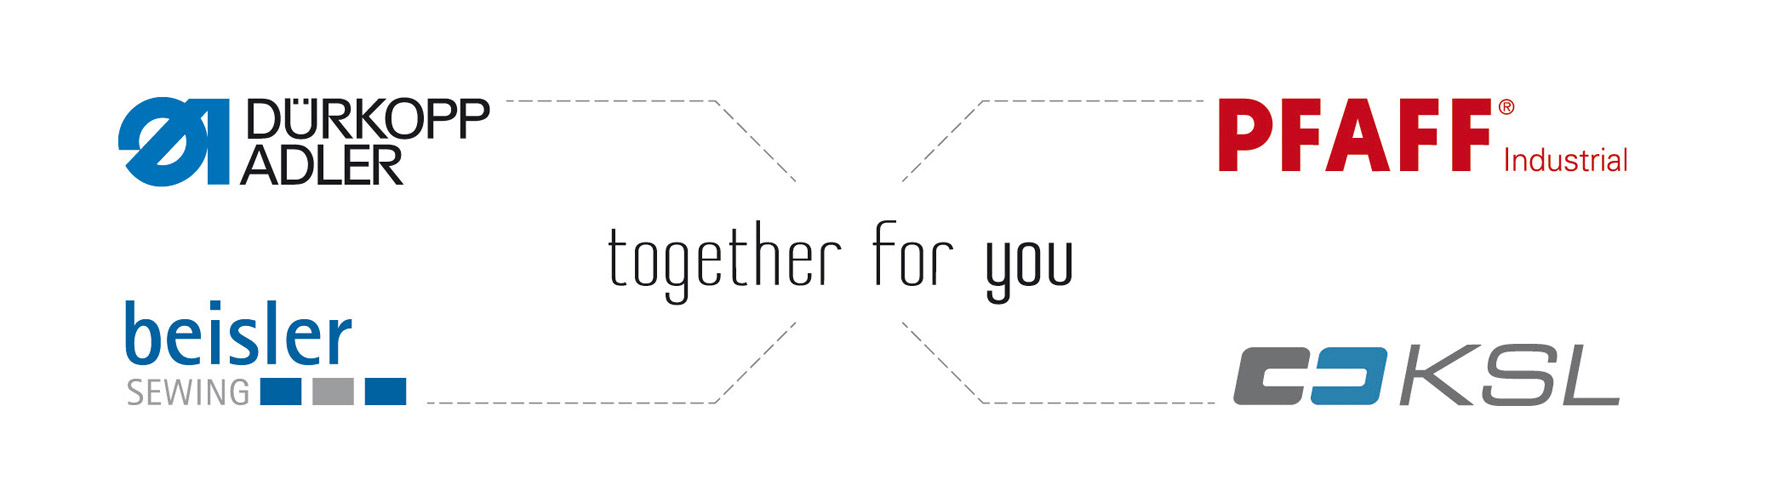 together_for_you2015